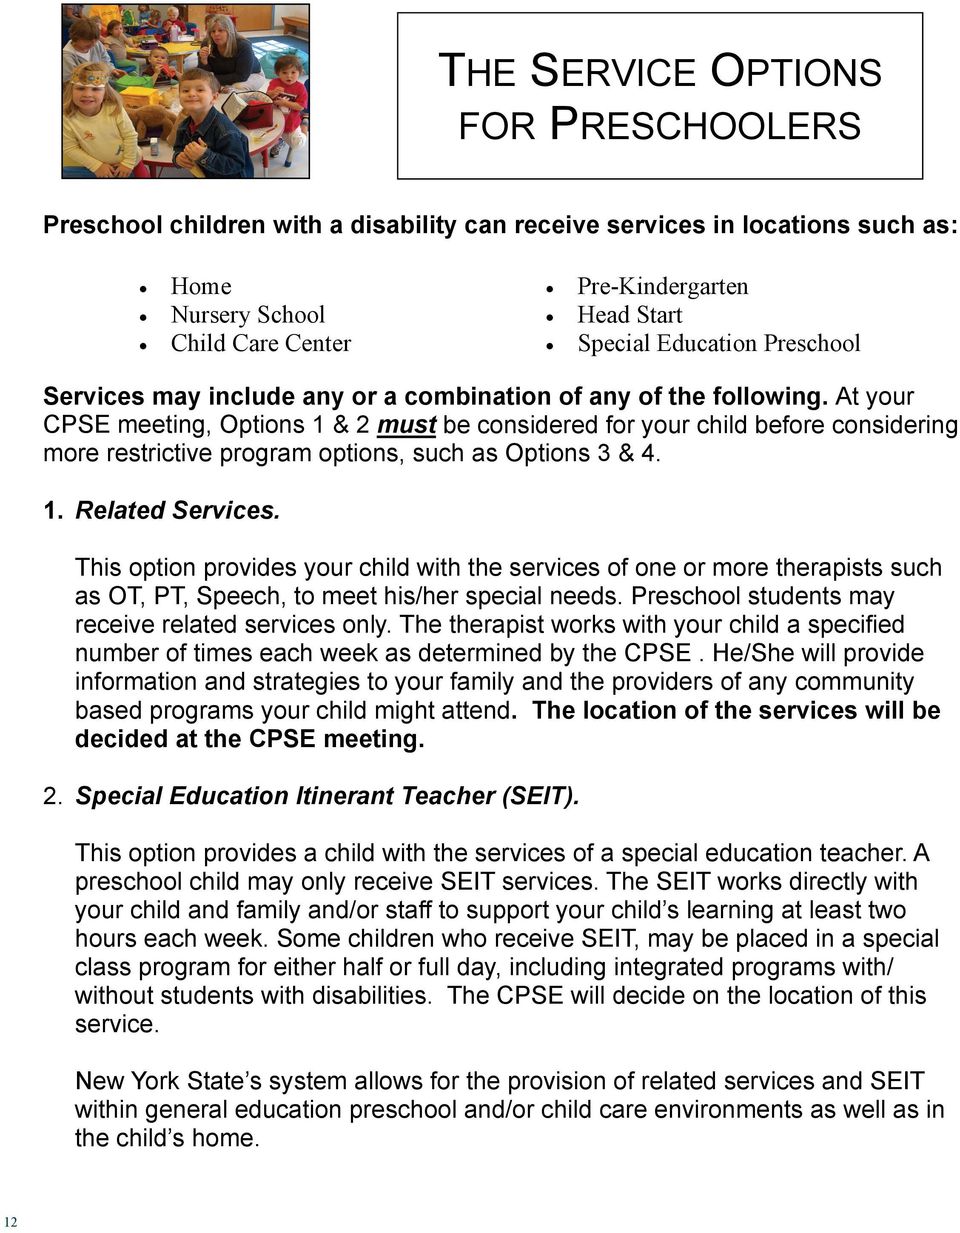 At your CPSE meeting, Options 1 & 2 must be considered for your child before considering more restrictive program options, such as Options 3 & 4. 1. Related Services.